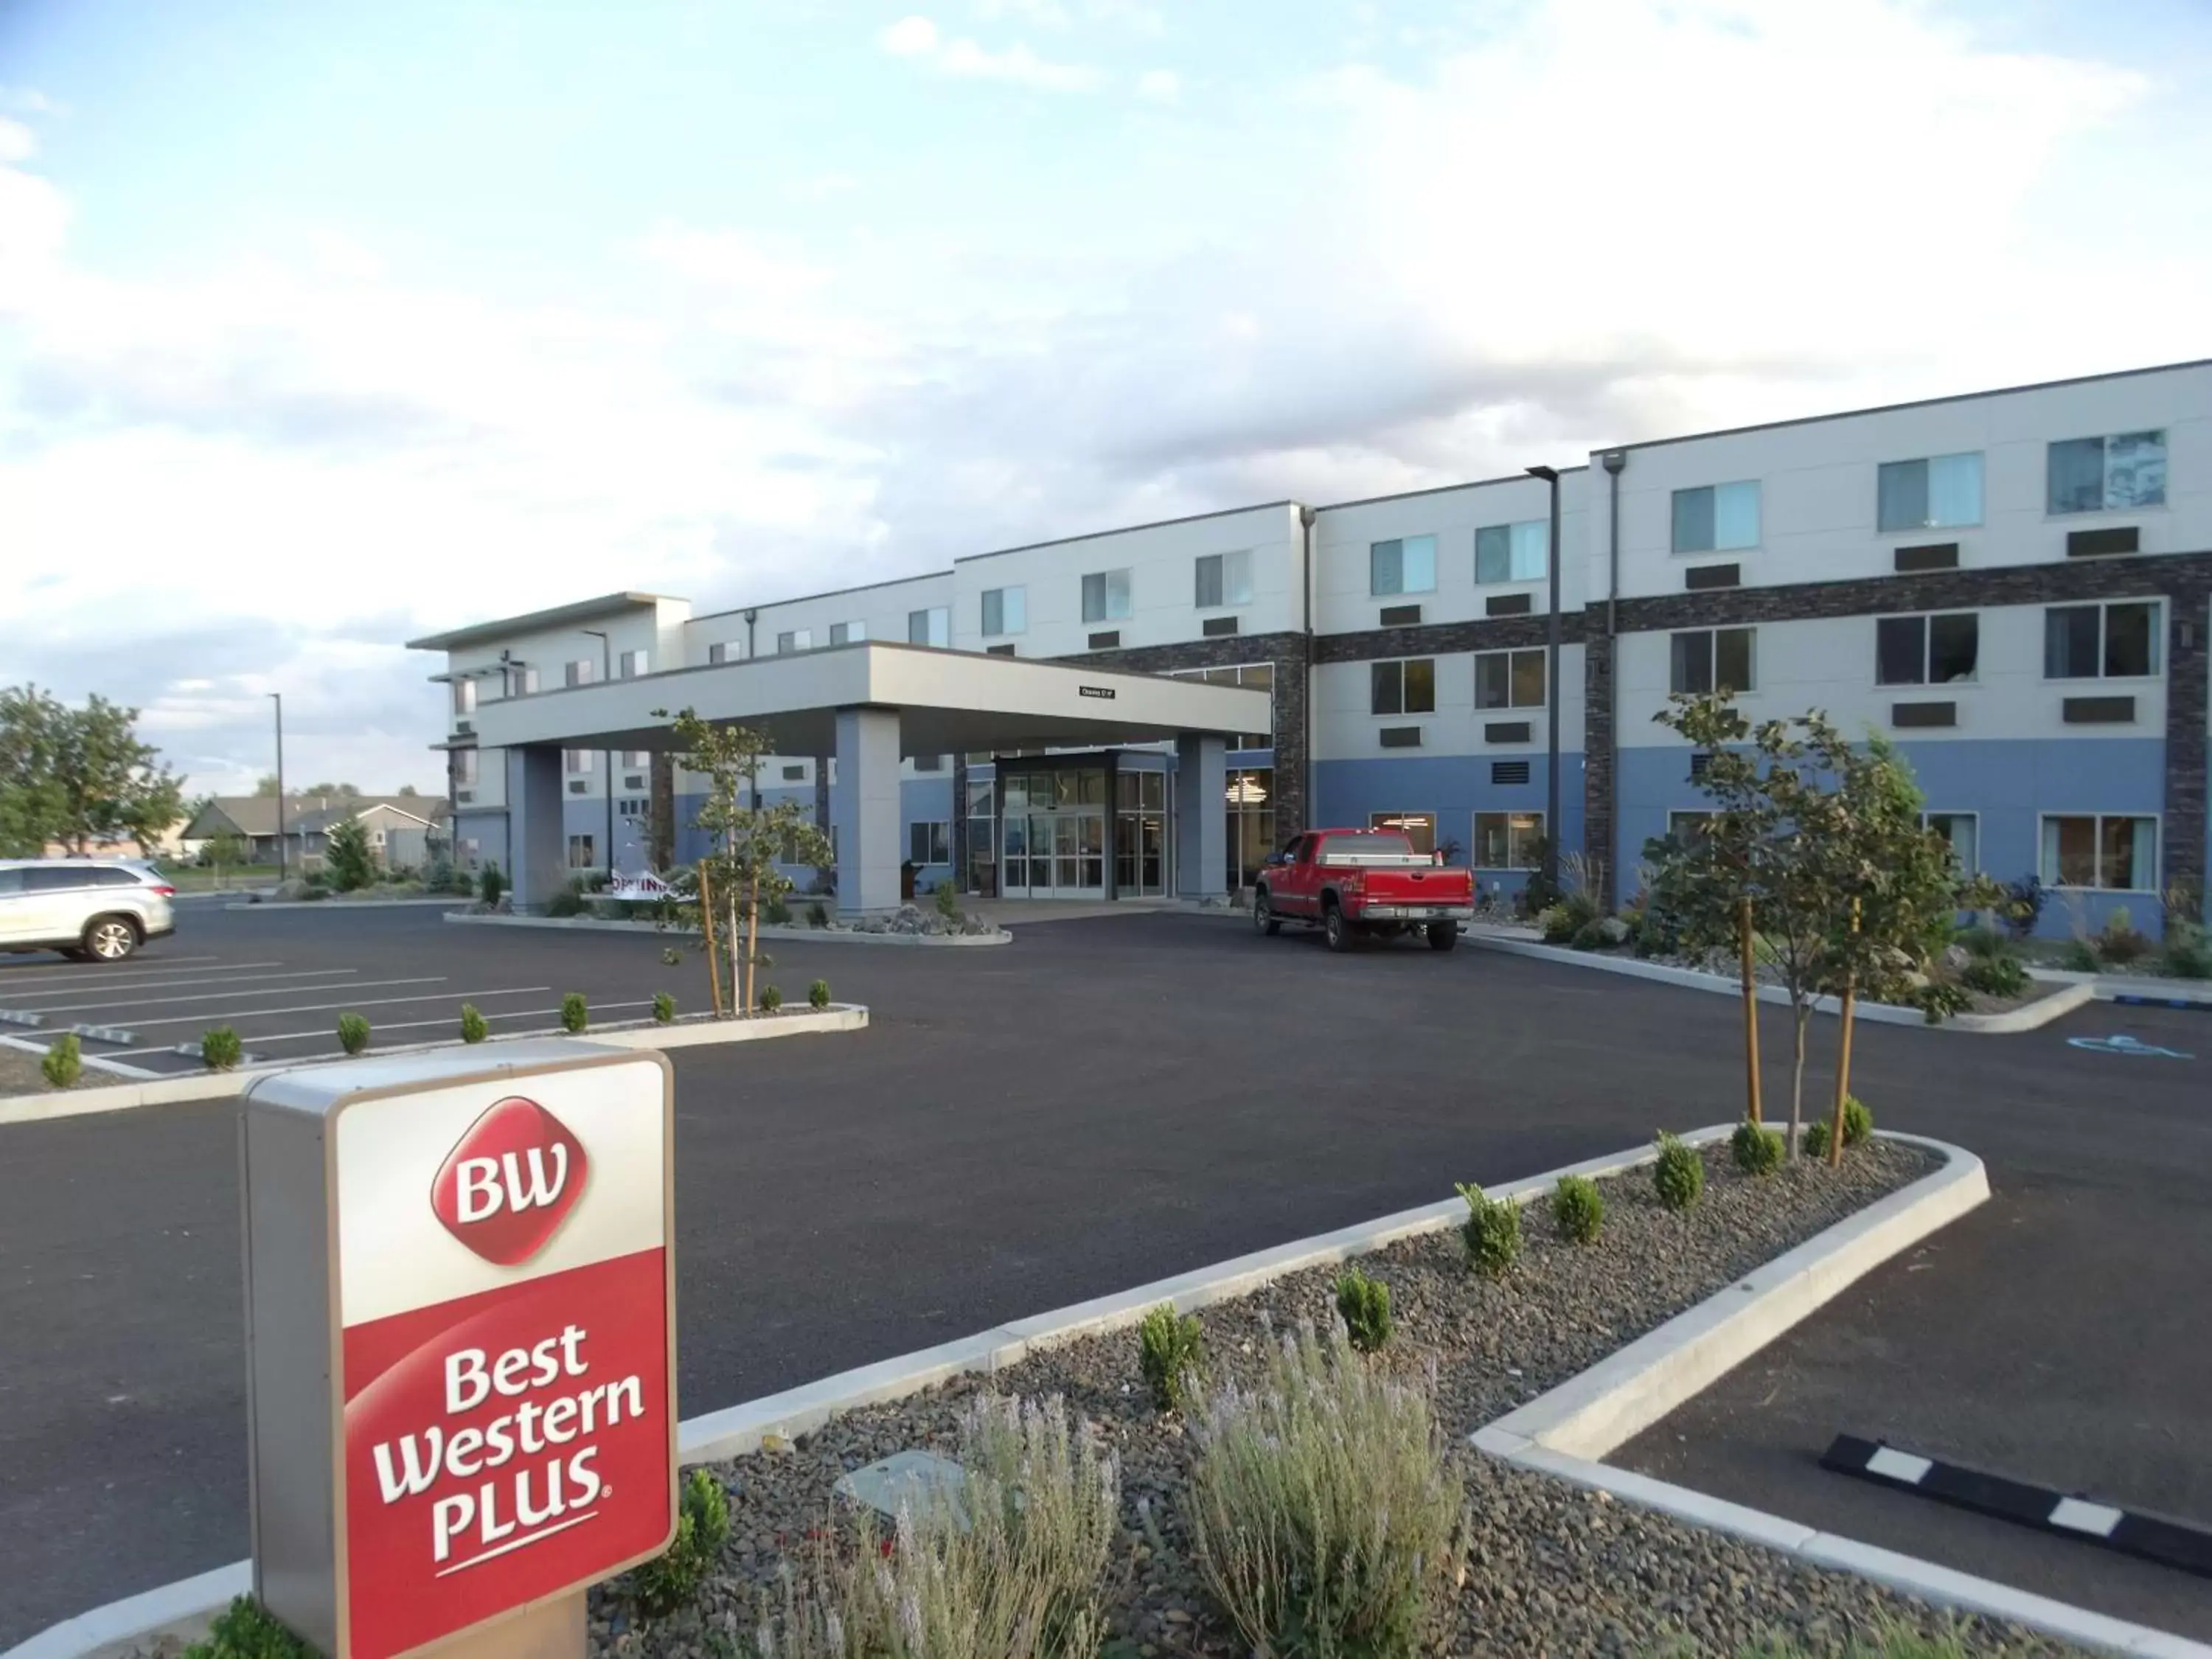 Property Building in Best Western Plus The Inn at Hells Canyon